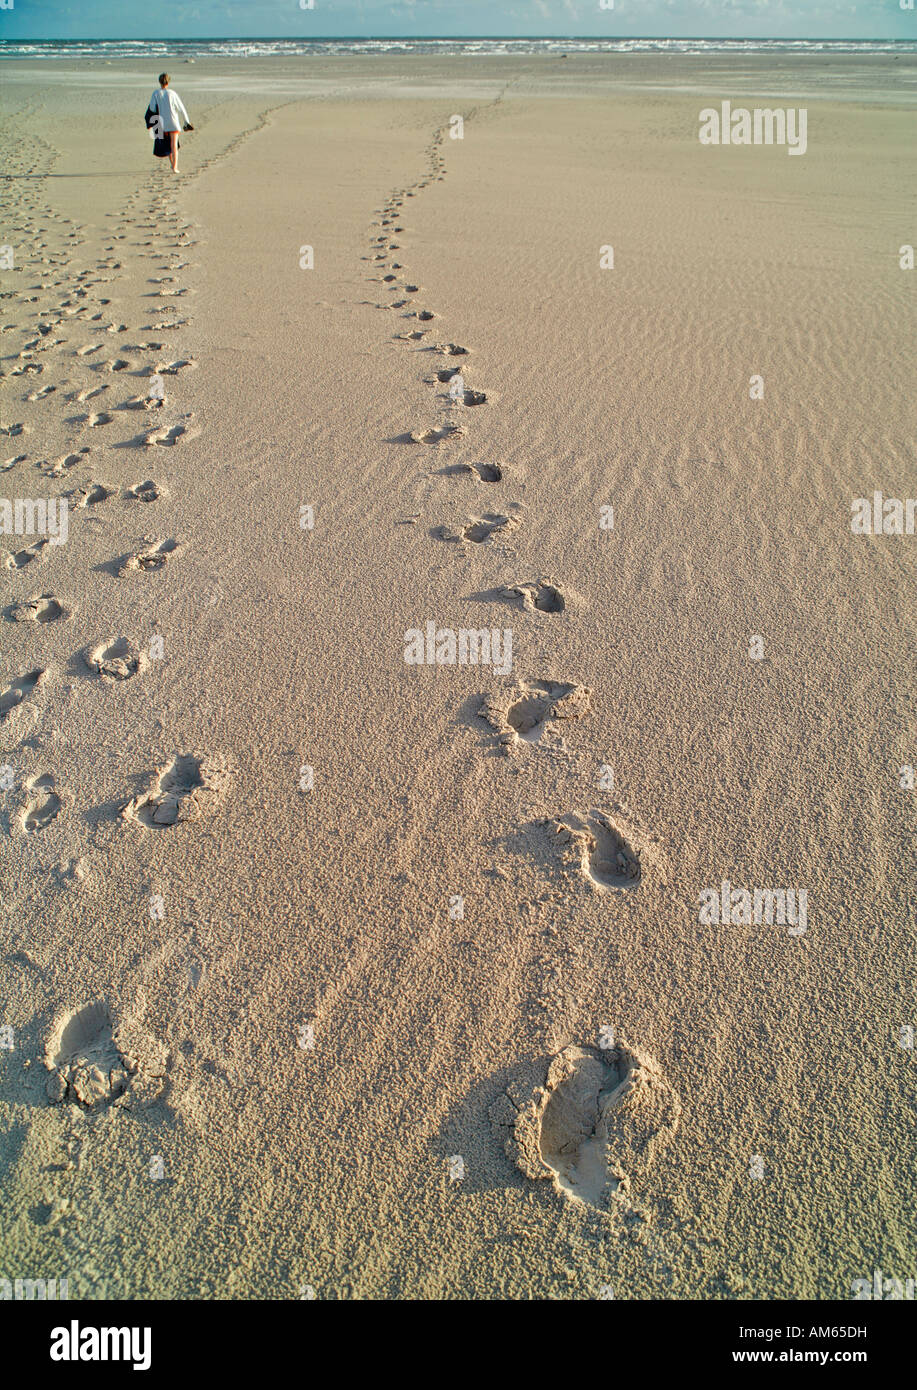 Foot prints in sand with walking person, Juist, Lower Saxony, Germany Stock Photo